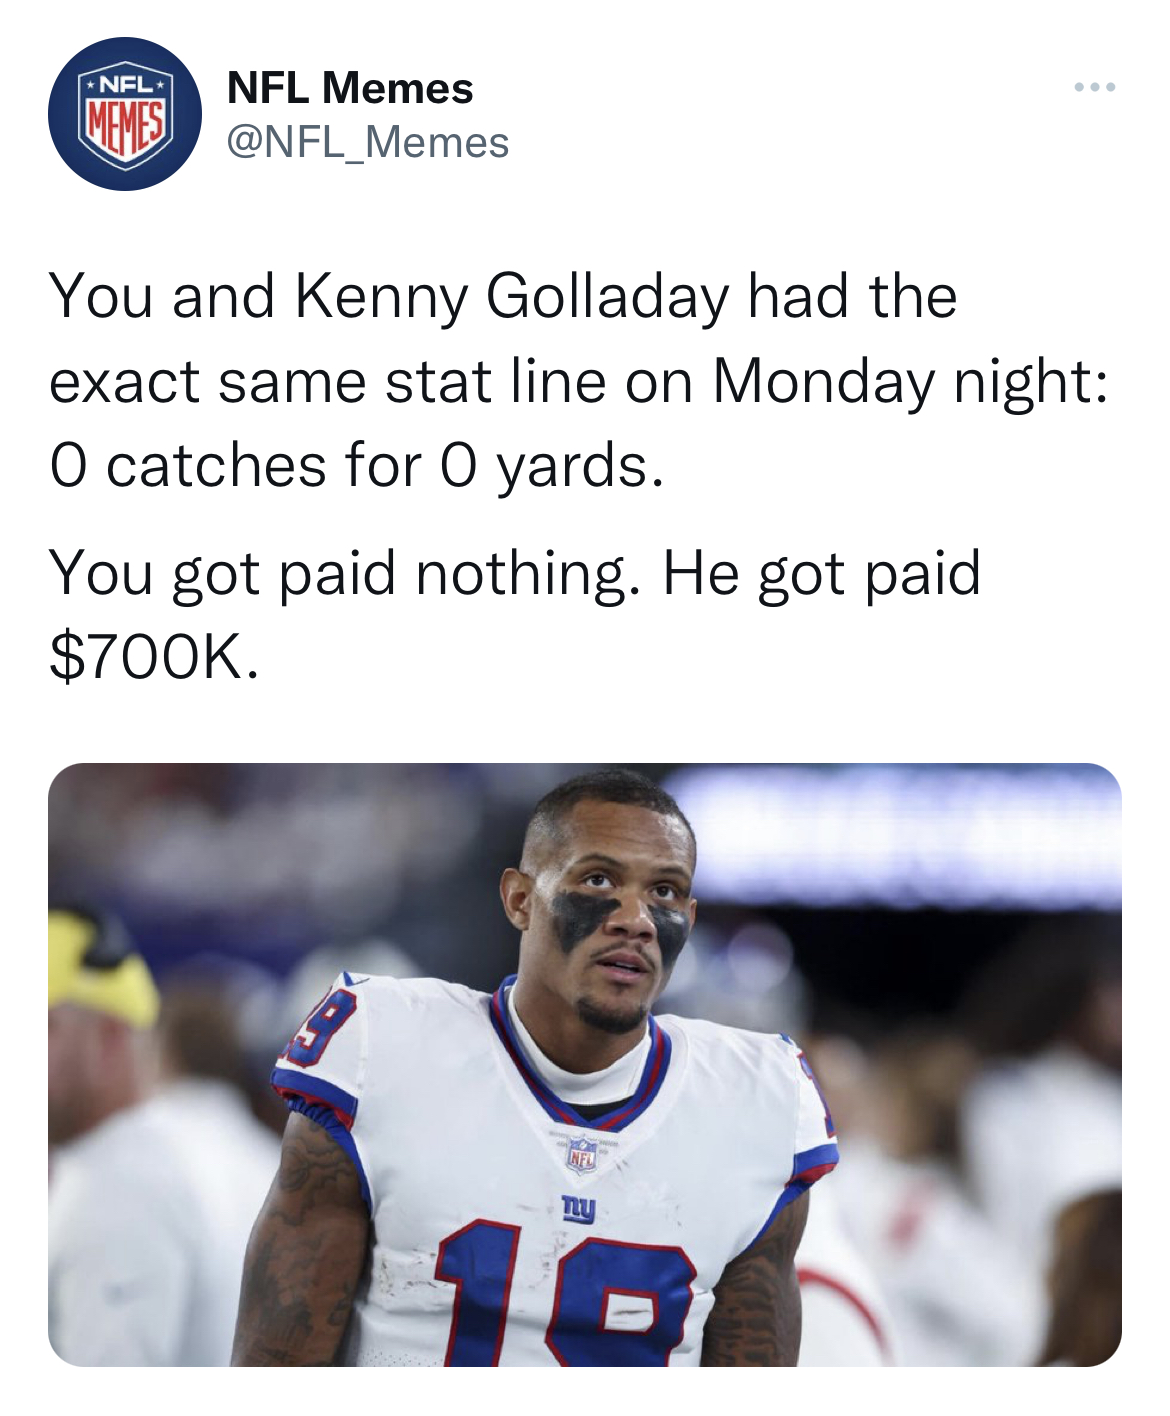 nfl memes - Kenny Golladay - Nfl Nfl Memes You and Kenny Golladay had the exact same stat line on Monday night O catches for 0 yards. You got paid nothing. He got paid $. E 10